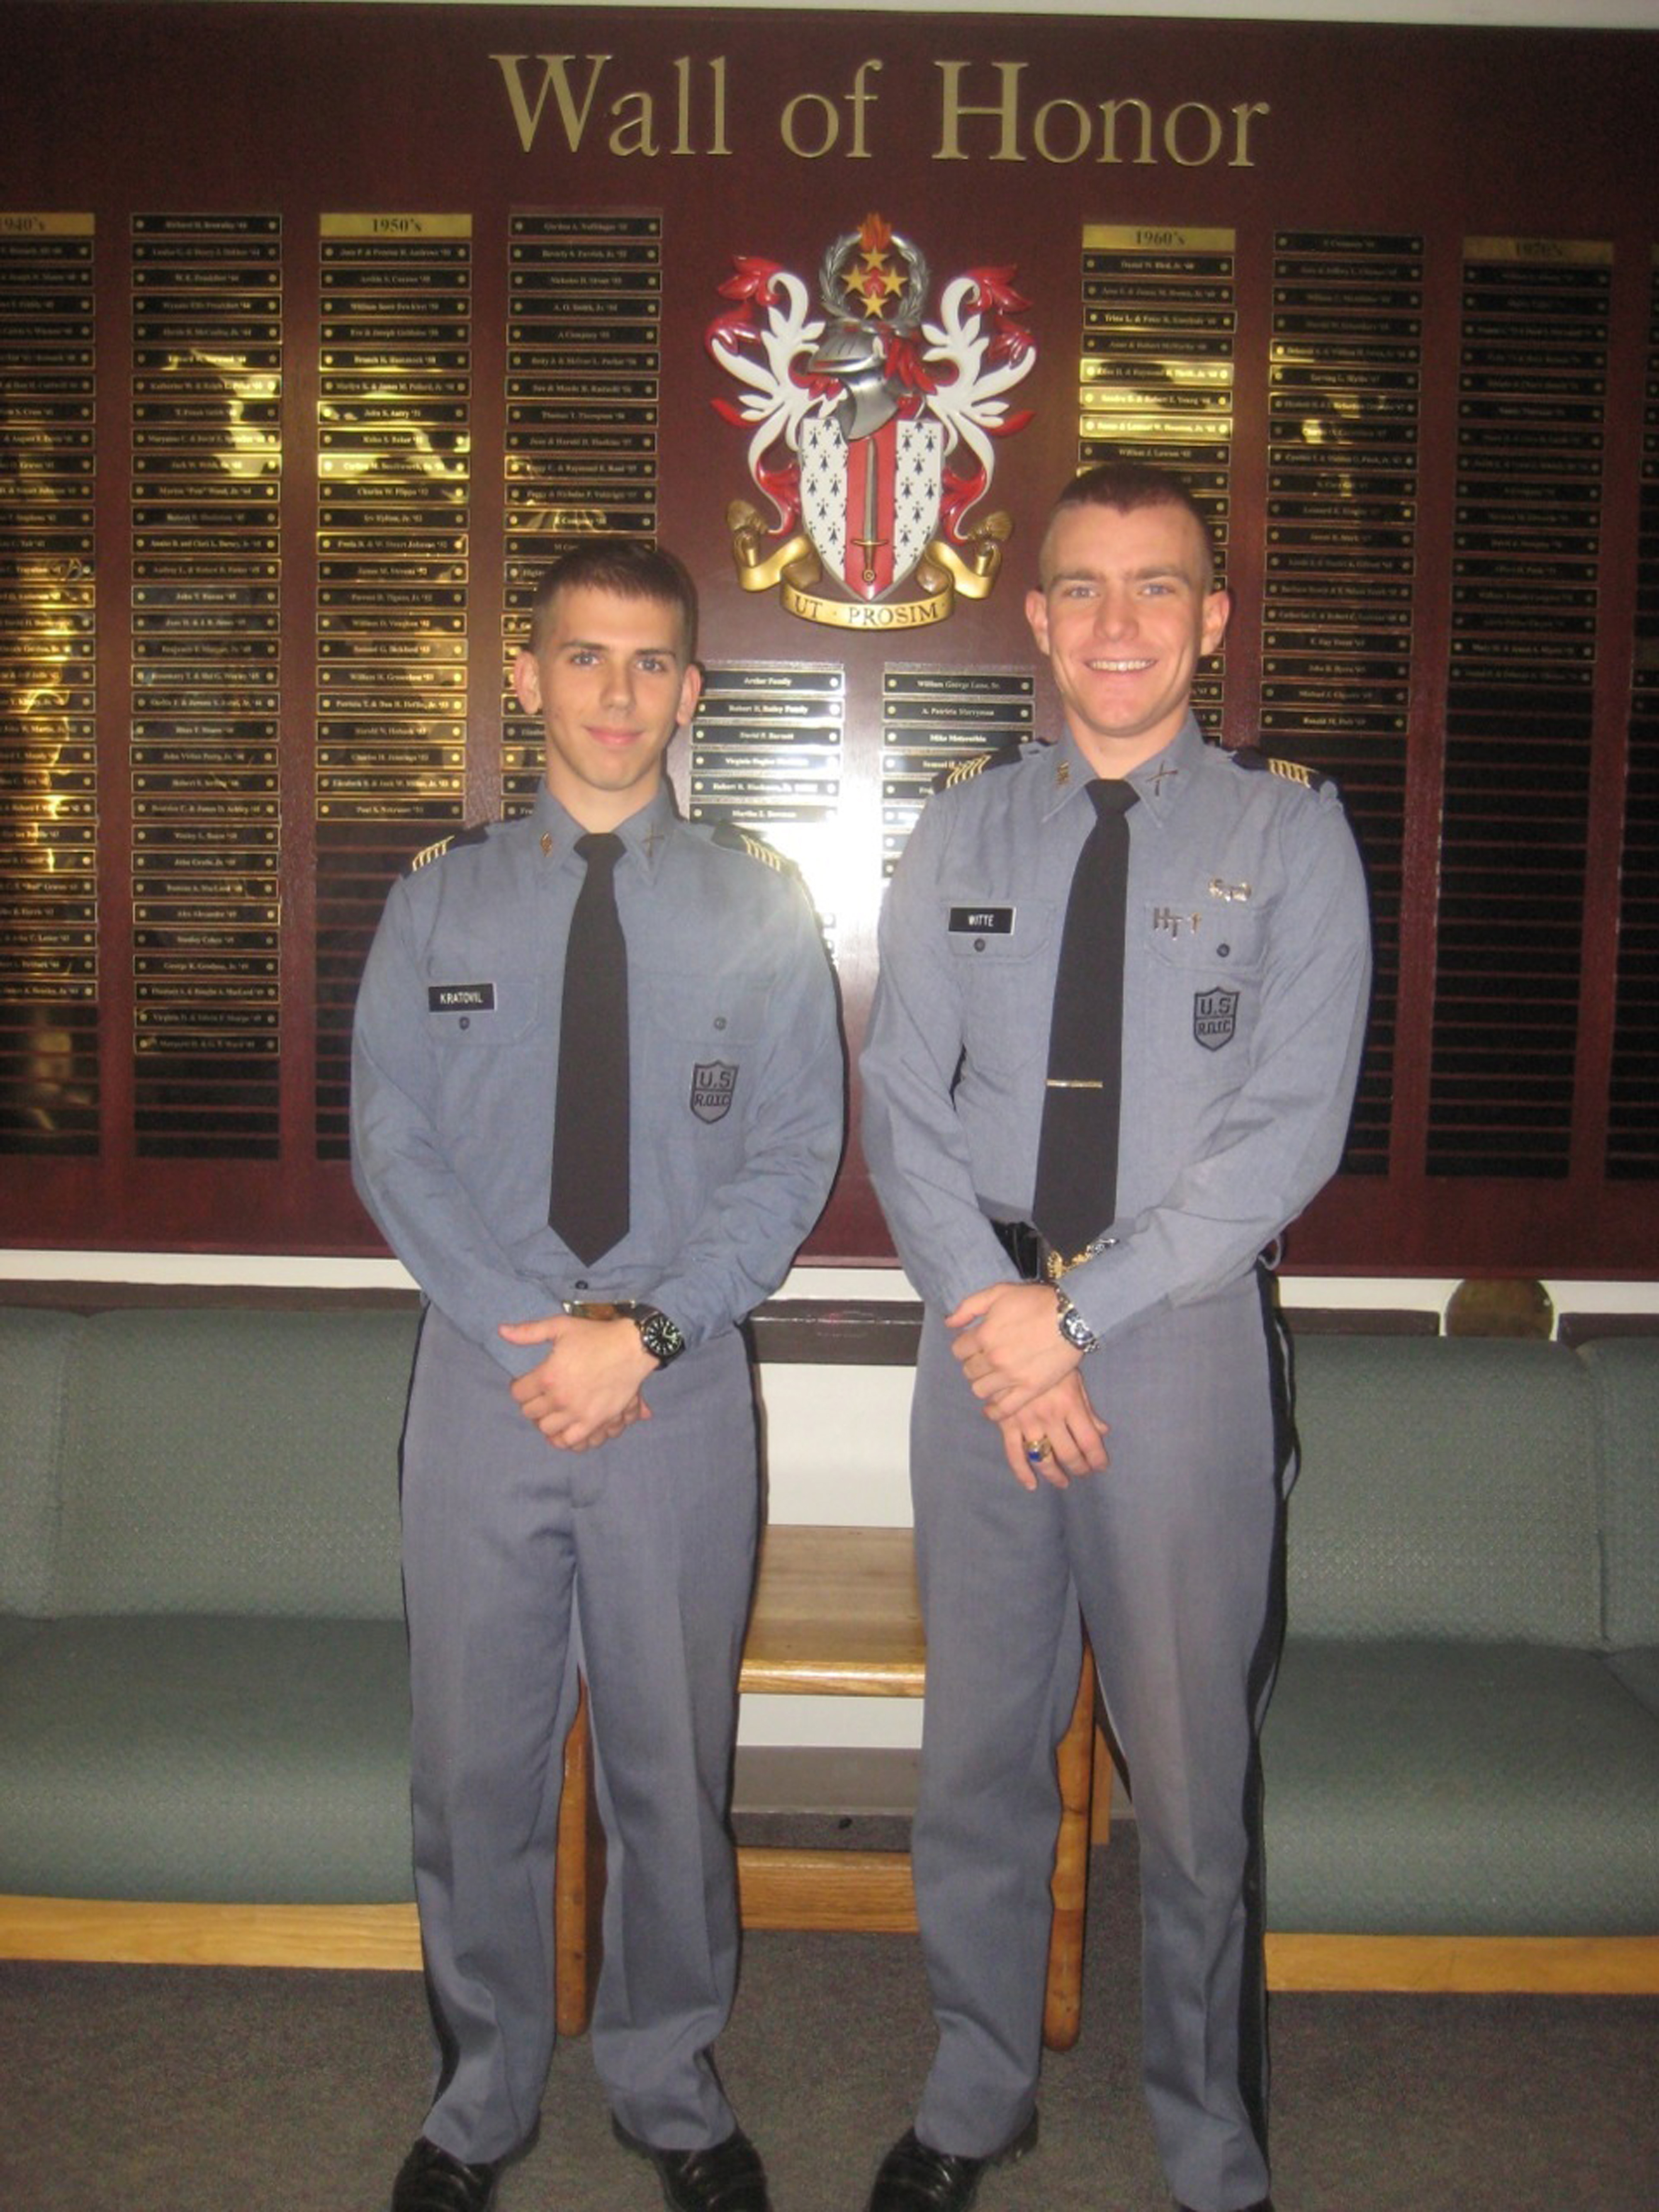 From left to right, Cadet Thomas Kratovil of Greensburg, Pa., a freshman majoring in general engineering in the College of Engineering had the opportunity to shadow the Band Commander, Cadet Maj. John Witte of Charlotte, N.C., a senior majoring in mechanical engineering in the College of Engineering as part of the Virginia Tech Corps of Cadets Shadow Day.